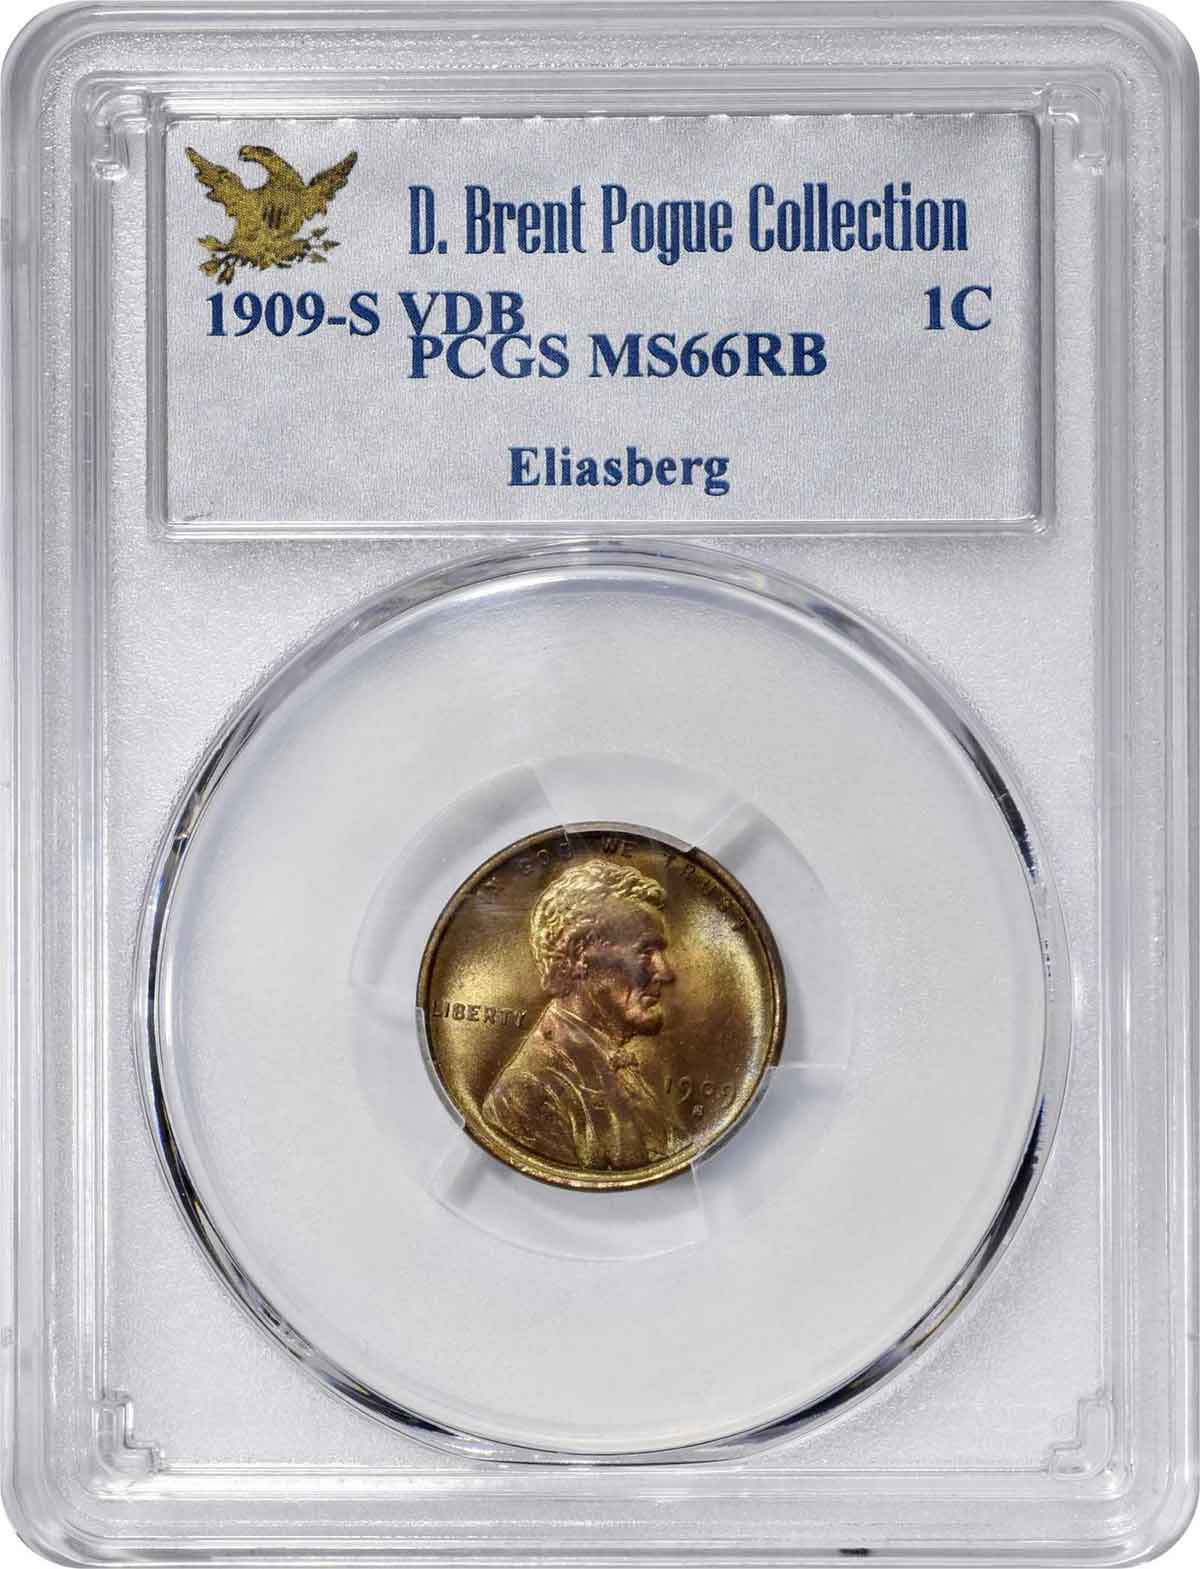 Brent Pogue Collection The D Part I Masterpieces of United States Coinage 